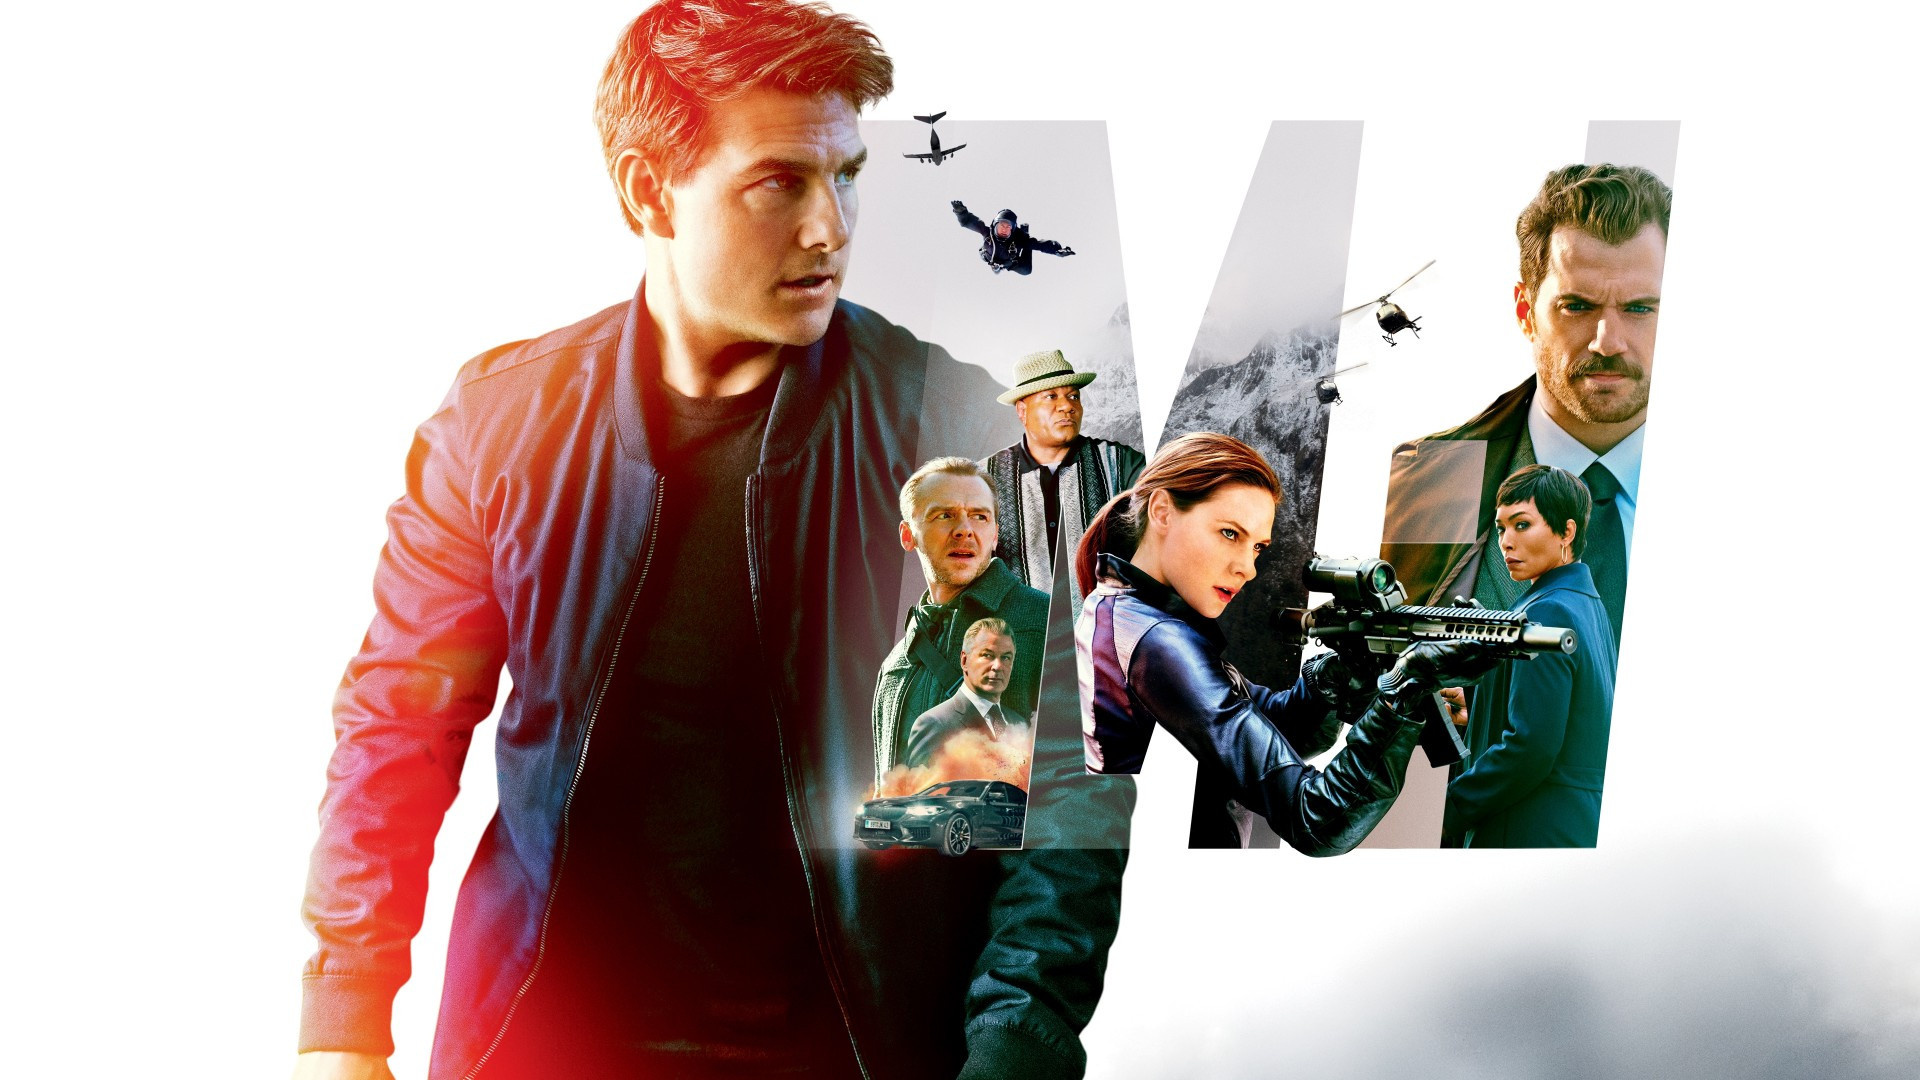 Tom Cruise Mission Impossible Fallout, Widescreen wallpapers, Blockbuster film, Action-packed, 1920x1080 Full HD Desktop